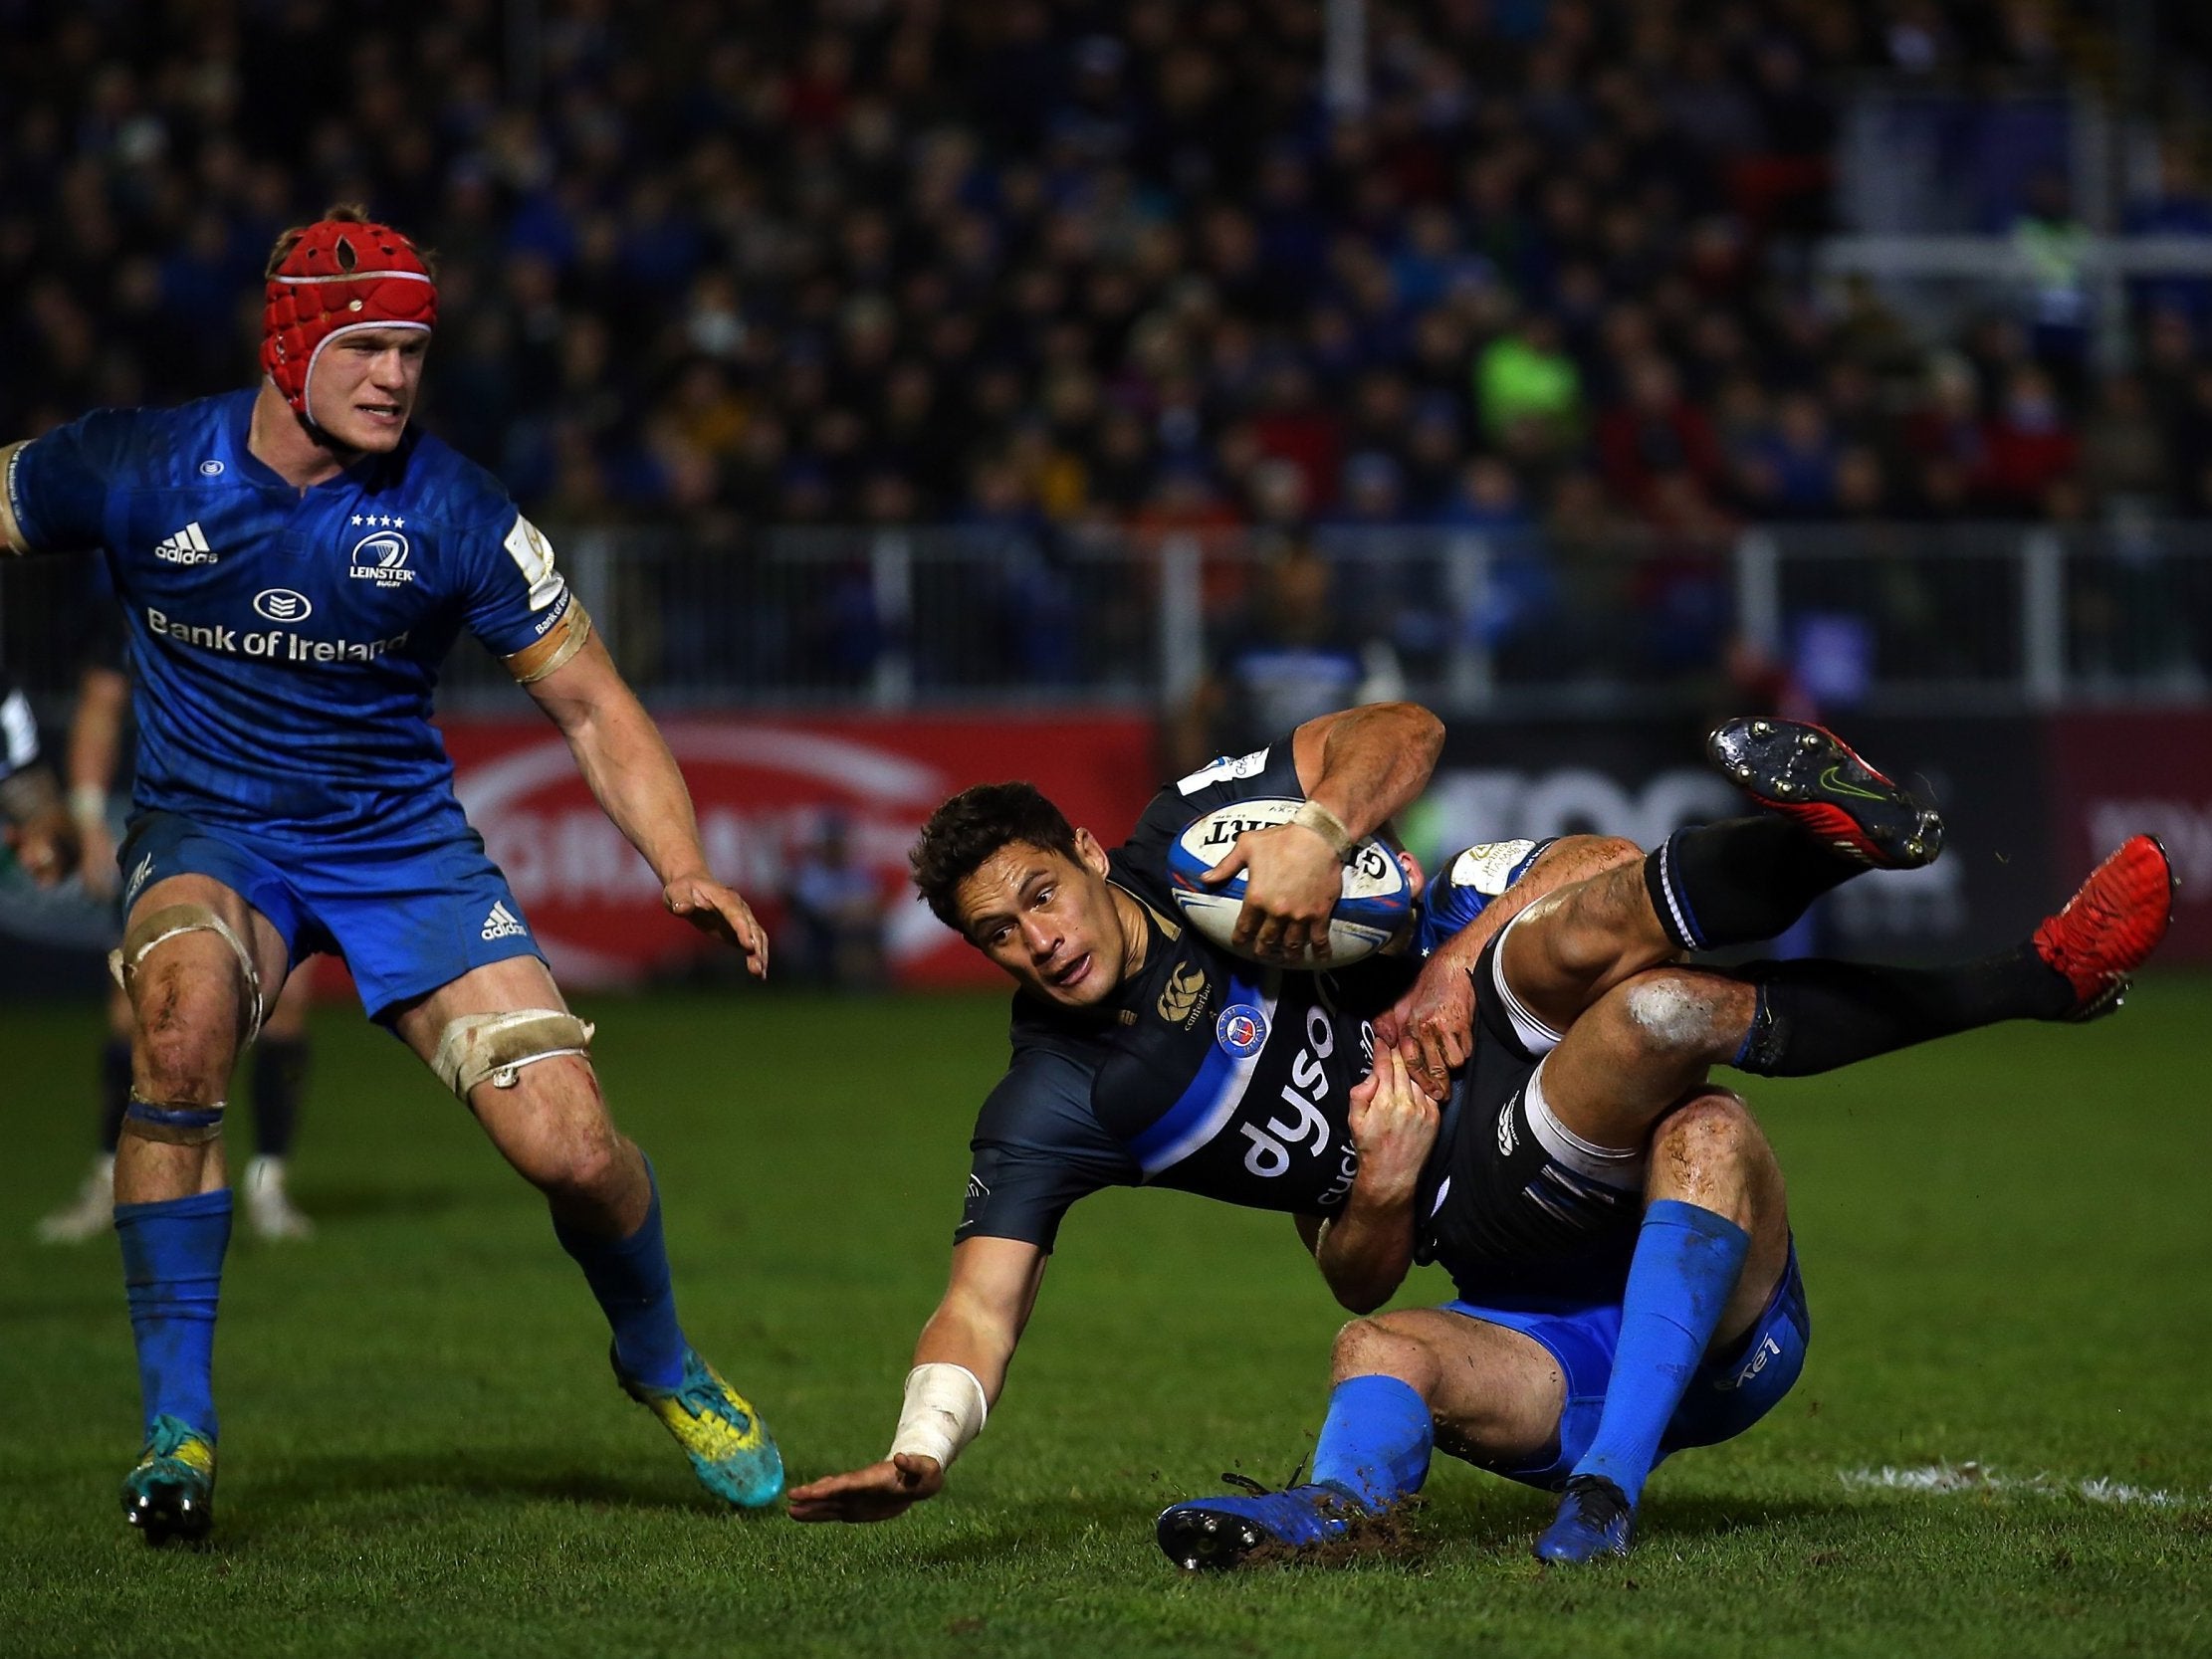 Bath produced one of their best performances of the season but it was not enough to stop Leinster